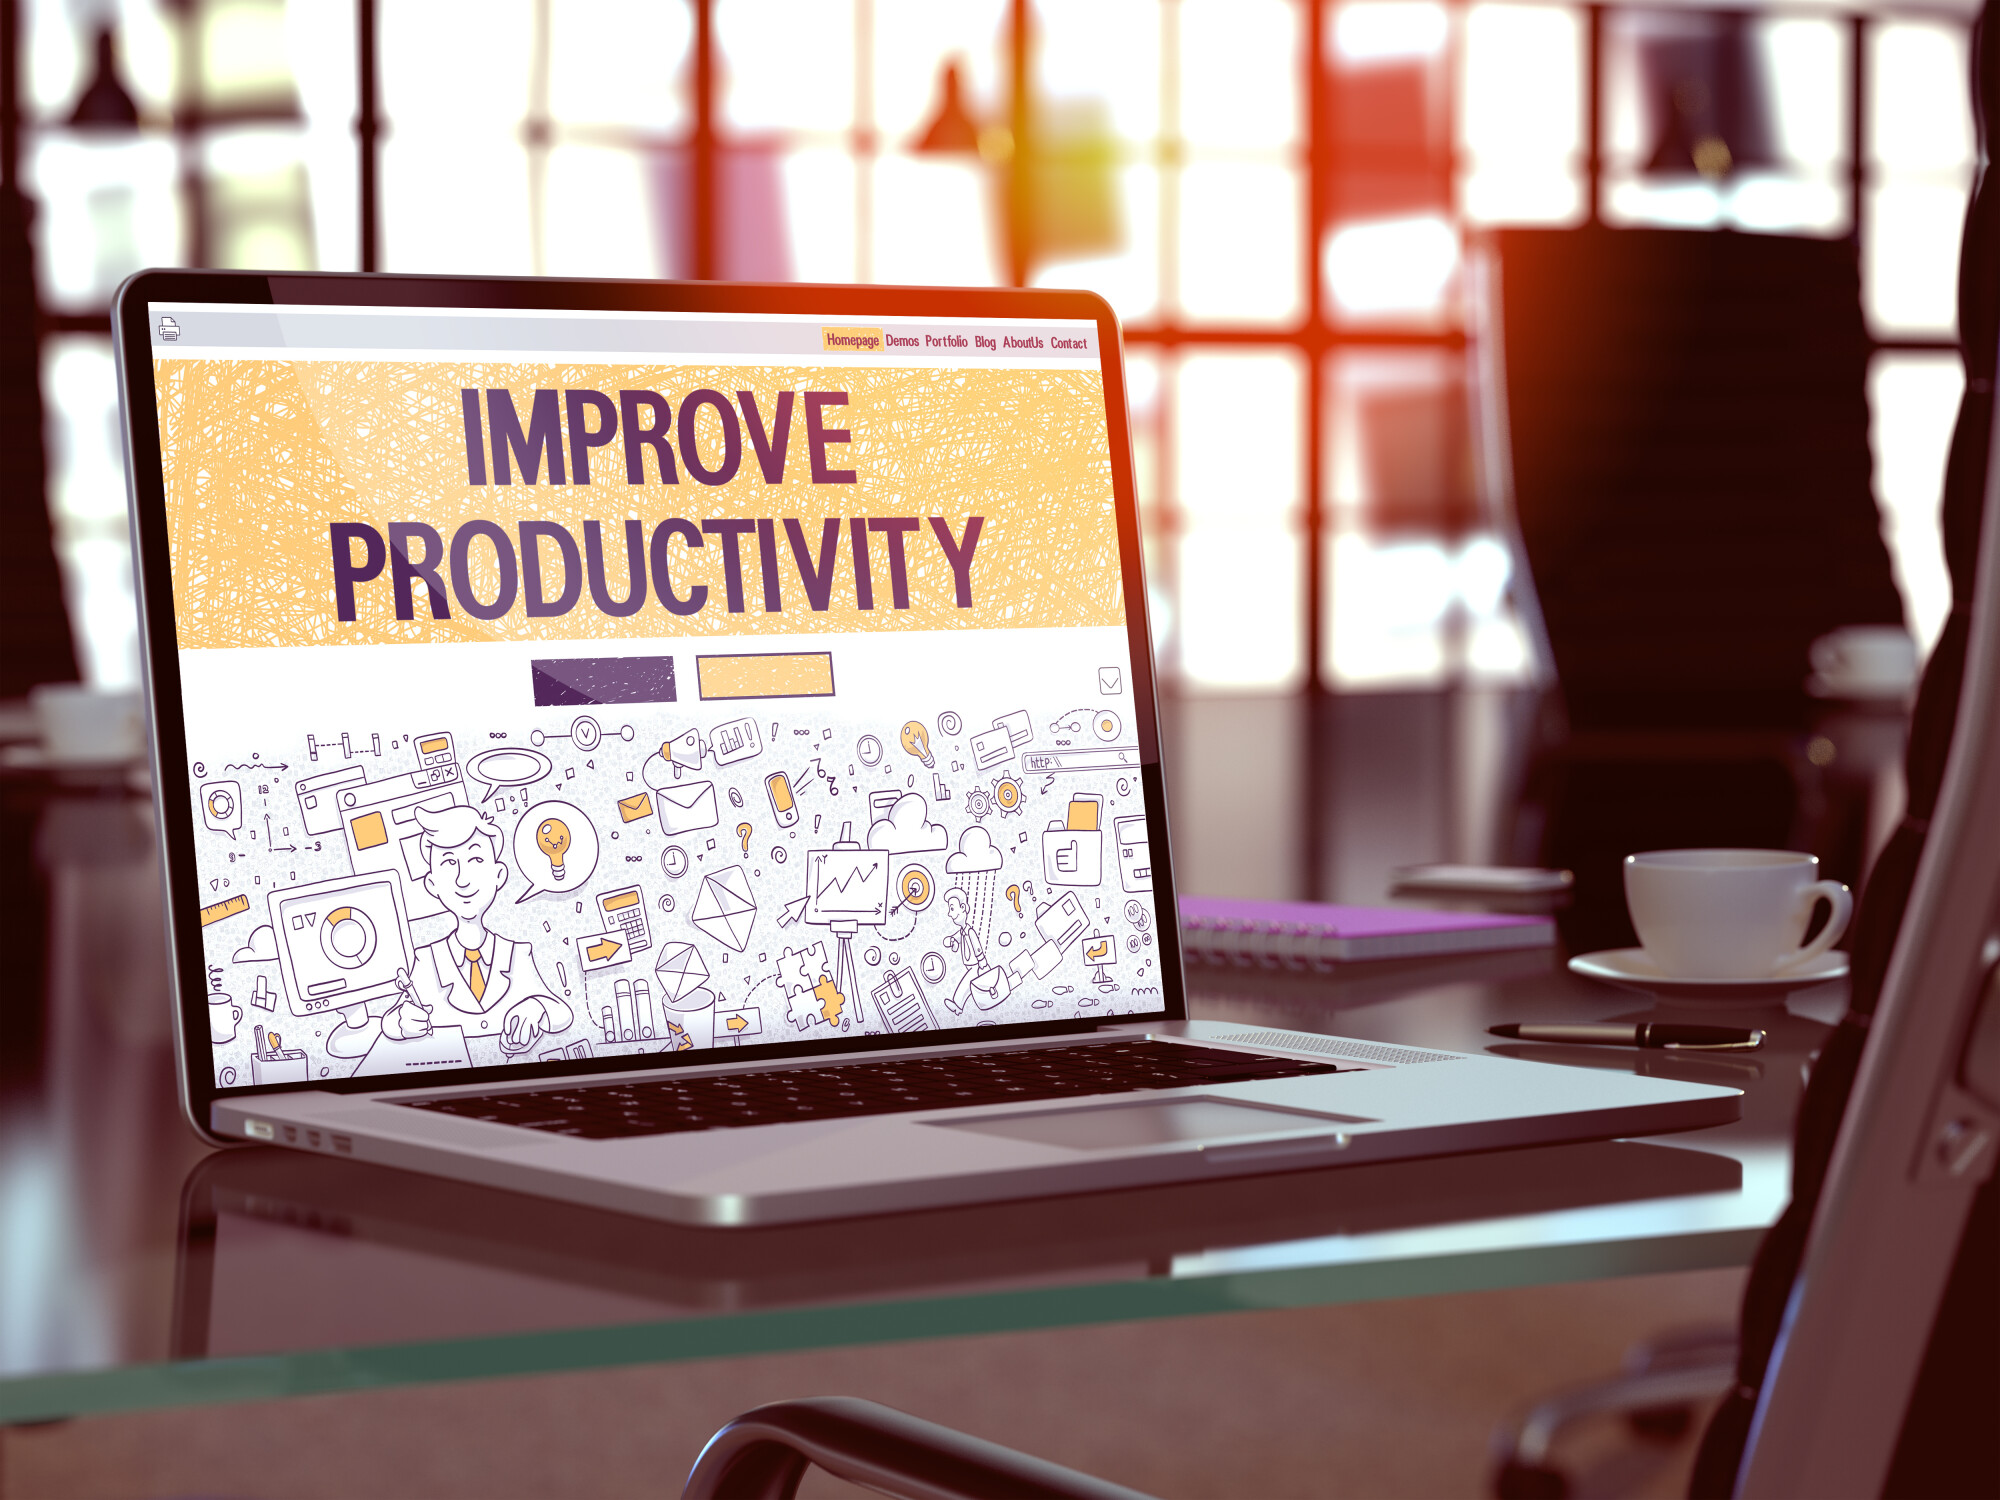 Improve Productivity - Closeup Landing Page in Doodle Design Style on Laptop Screen. On Background of Comfortable Working Place in Modern Office. Toned, Blurred Image.  3D Render.